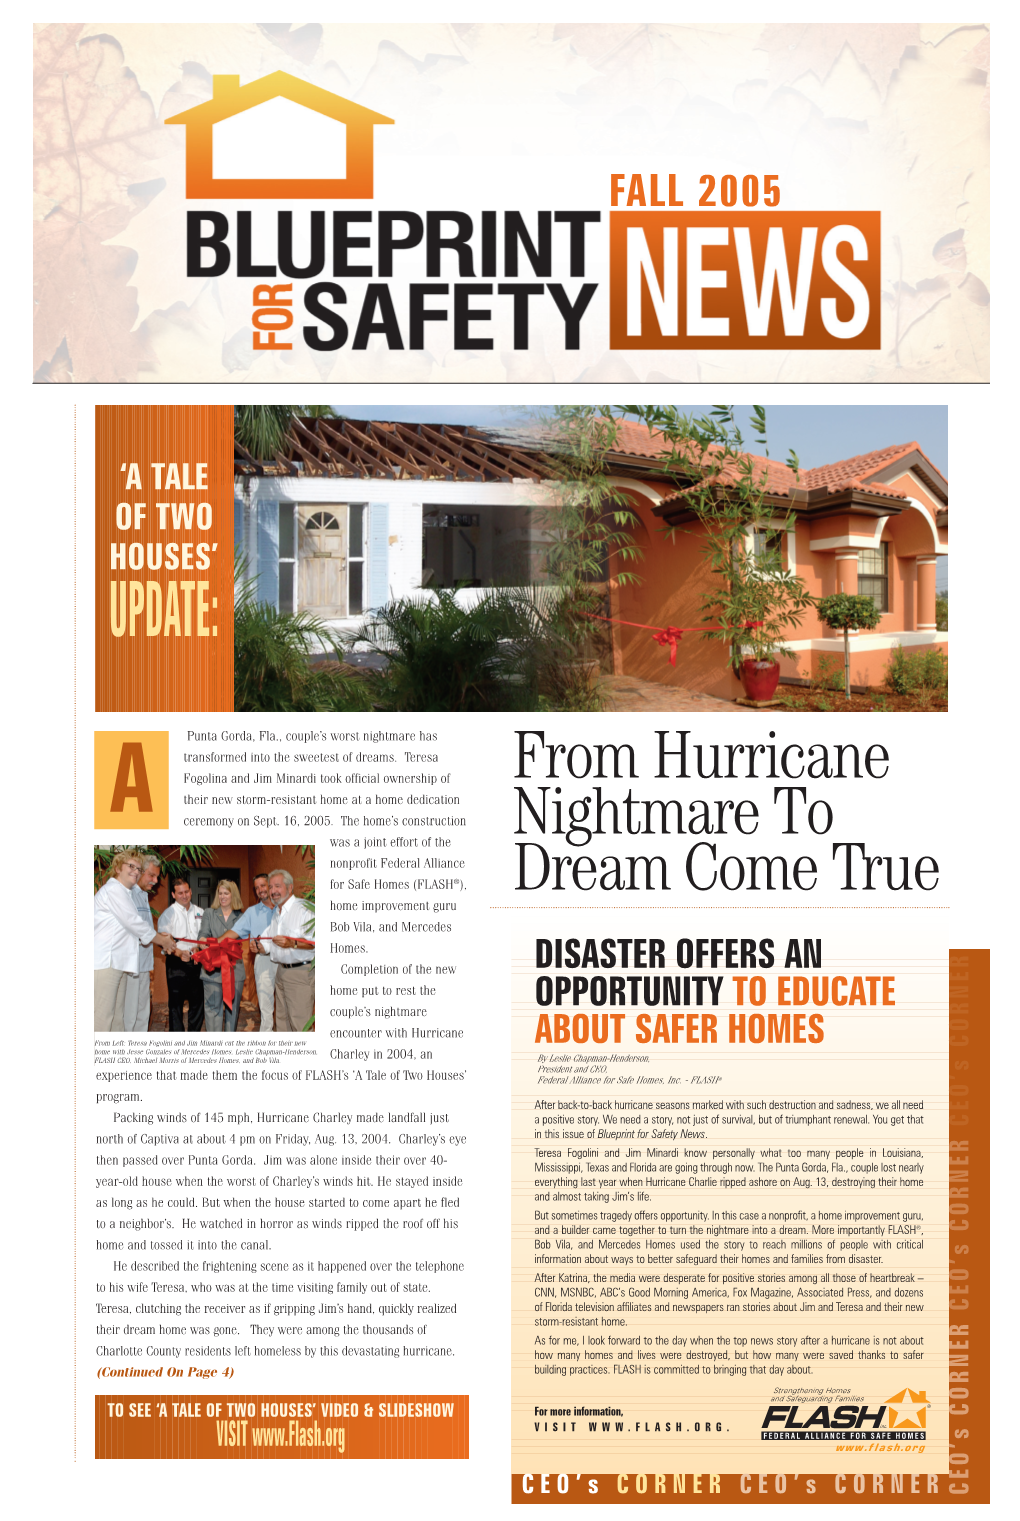 2005 Fall Blueprint for Safety News -- A